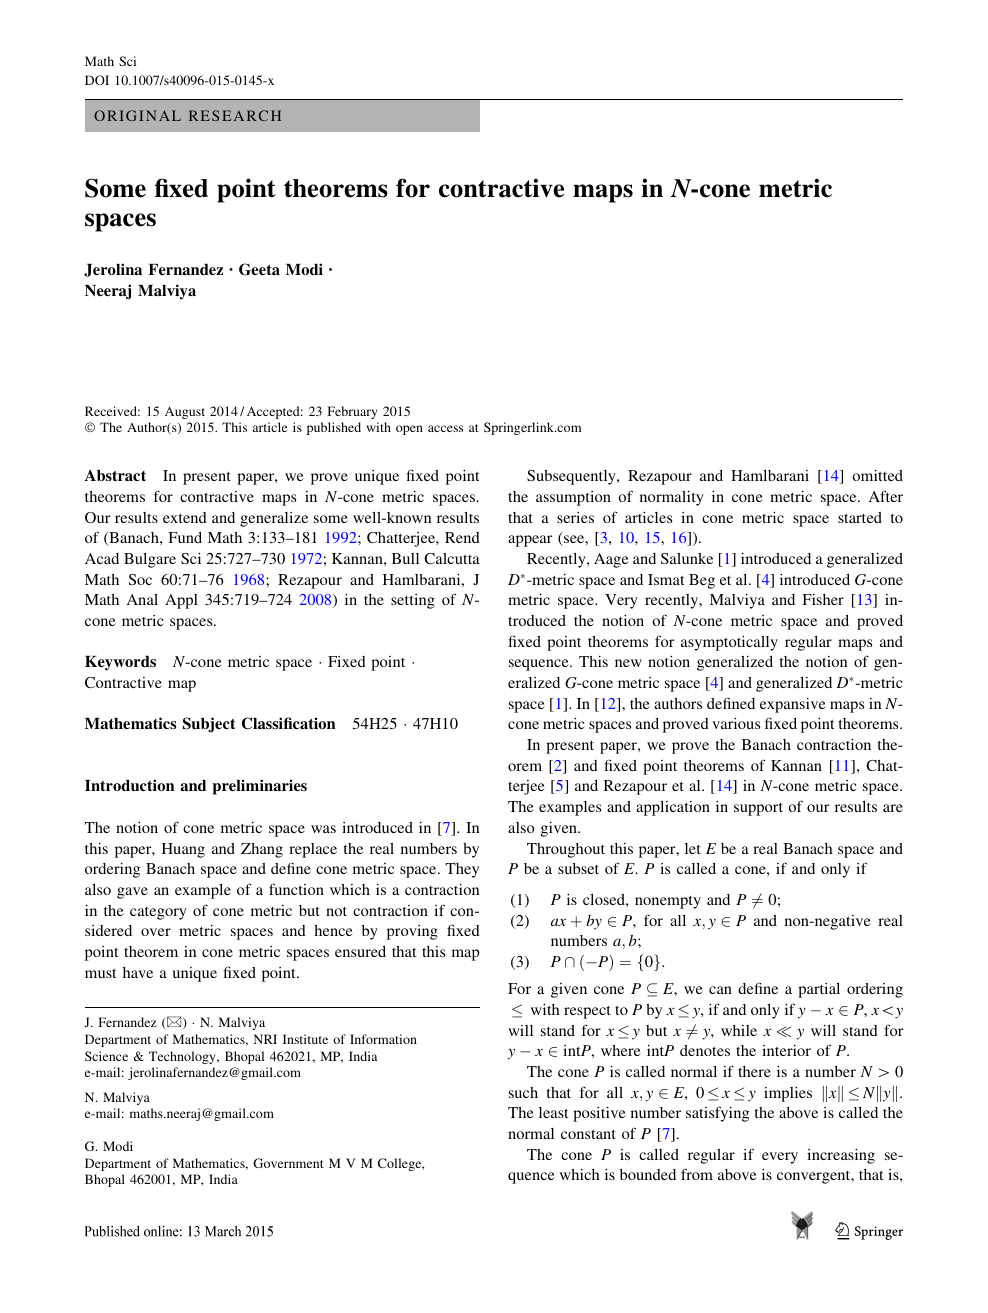 Some Fixed Point Theorems For Contractive Maps In N Cone Metric Spaces Topic Of Research Paper In Mathematics Download Scholarly Article Pdf And Read For Free On Cyberleninka Open Science Hub